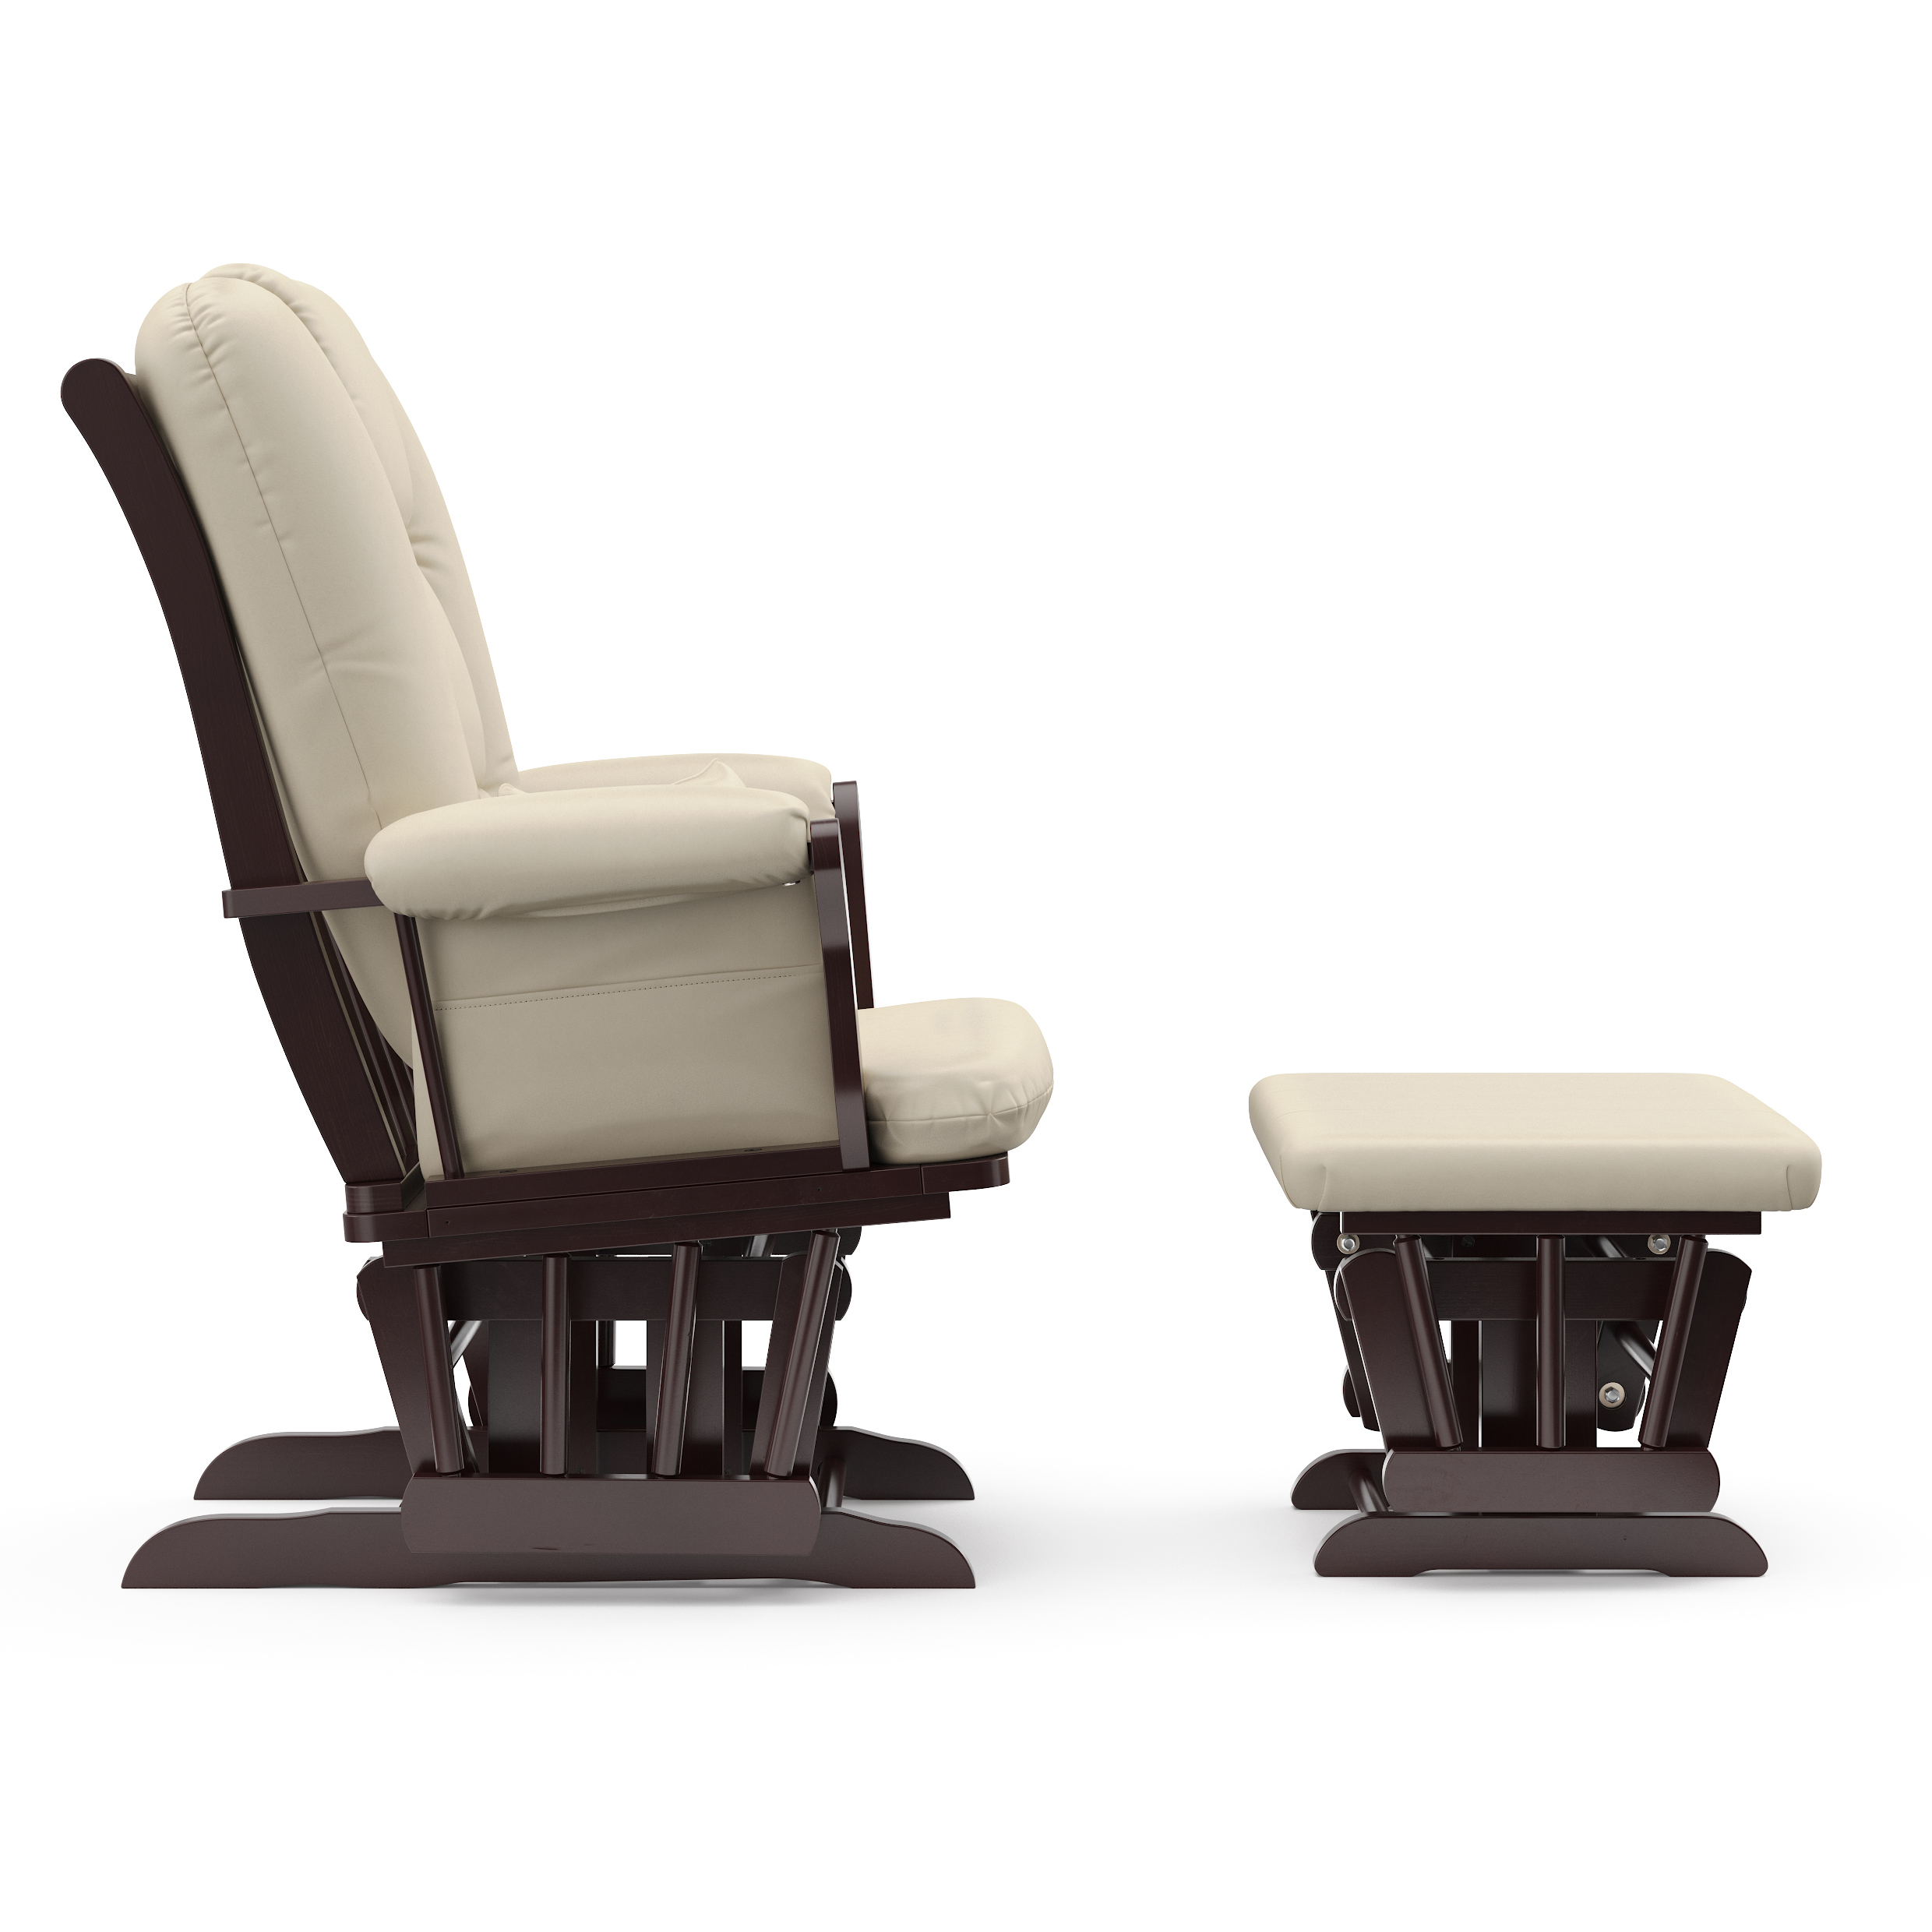 Storkcraft Tuscany Glider and Ottoman with Lower Lumbar Pillow, Espresso Finish with Beige Cushions - image 3 of 7